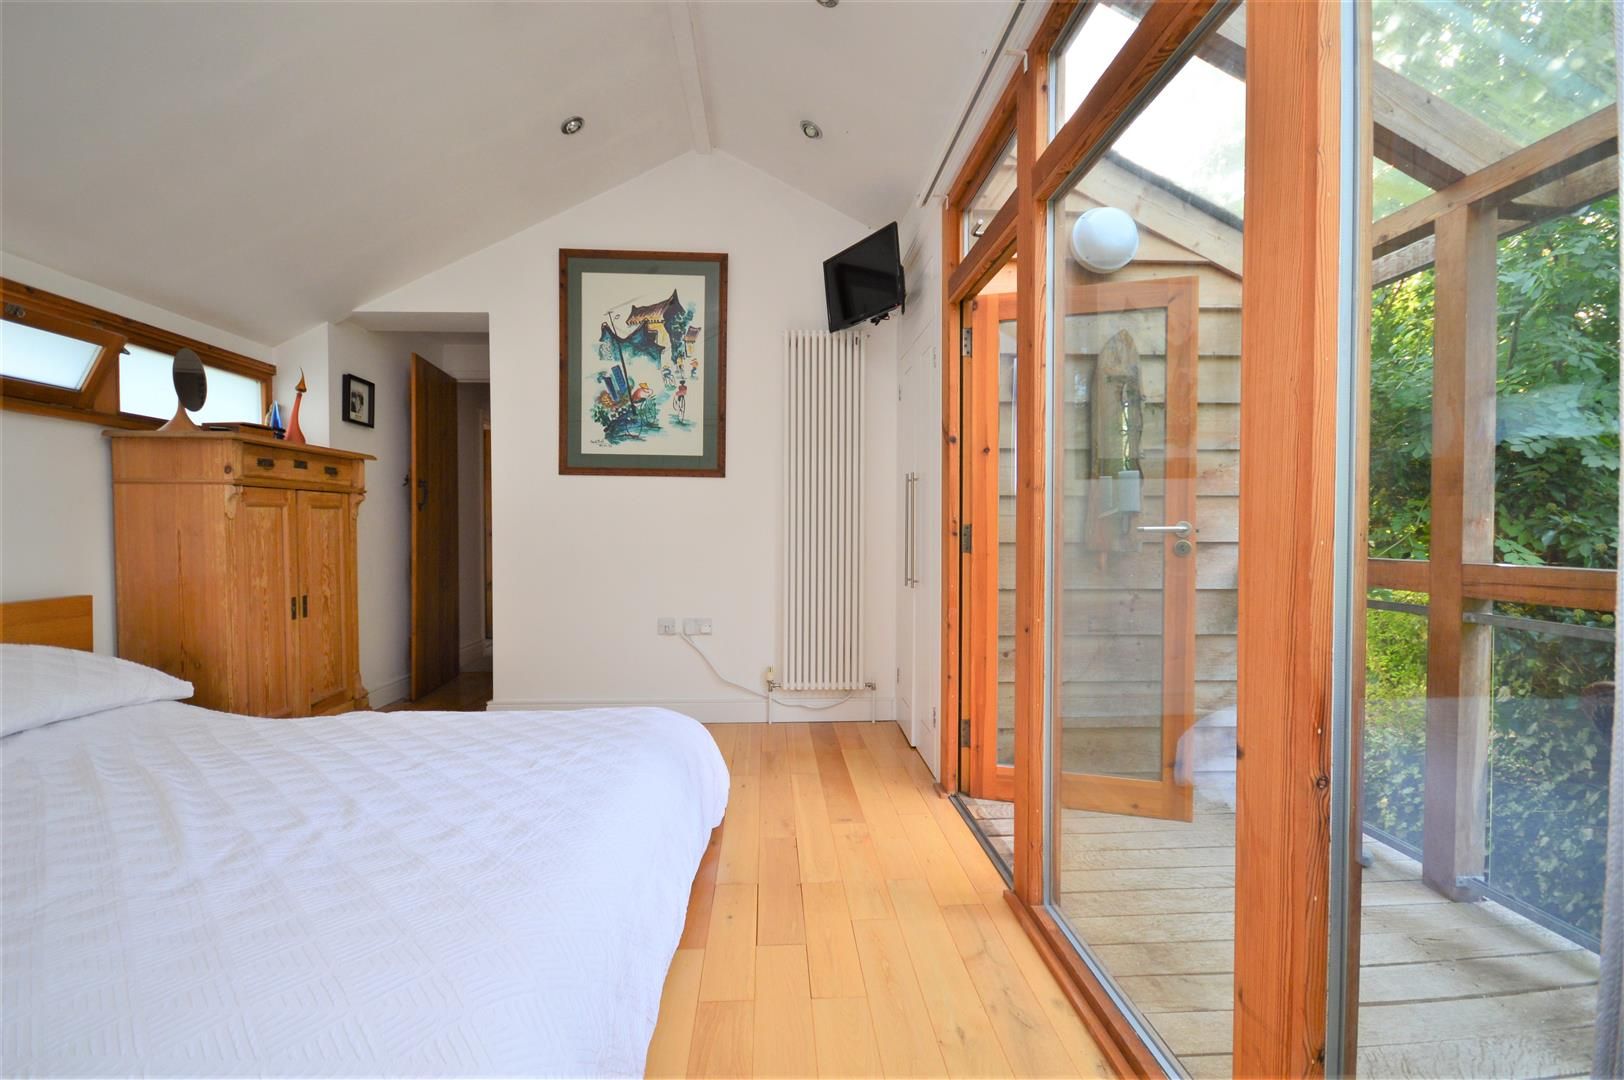 4 bed cottage for sale in Withington 10